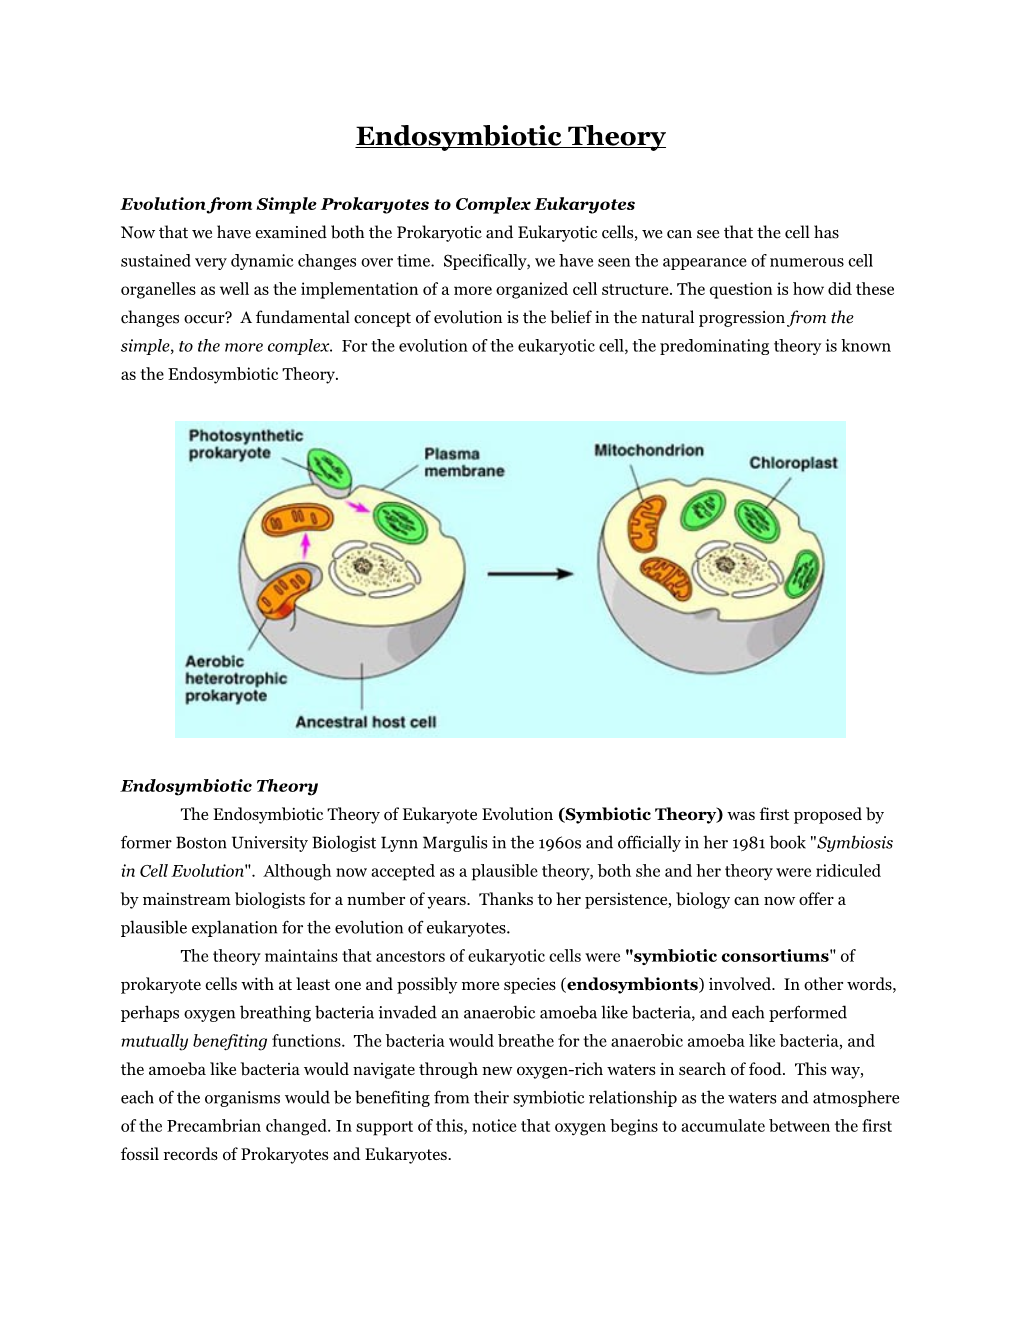 Evolution from Simple Prokaryotes to Complex Eukaryotes